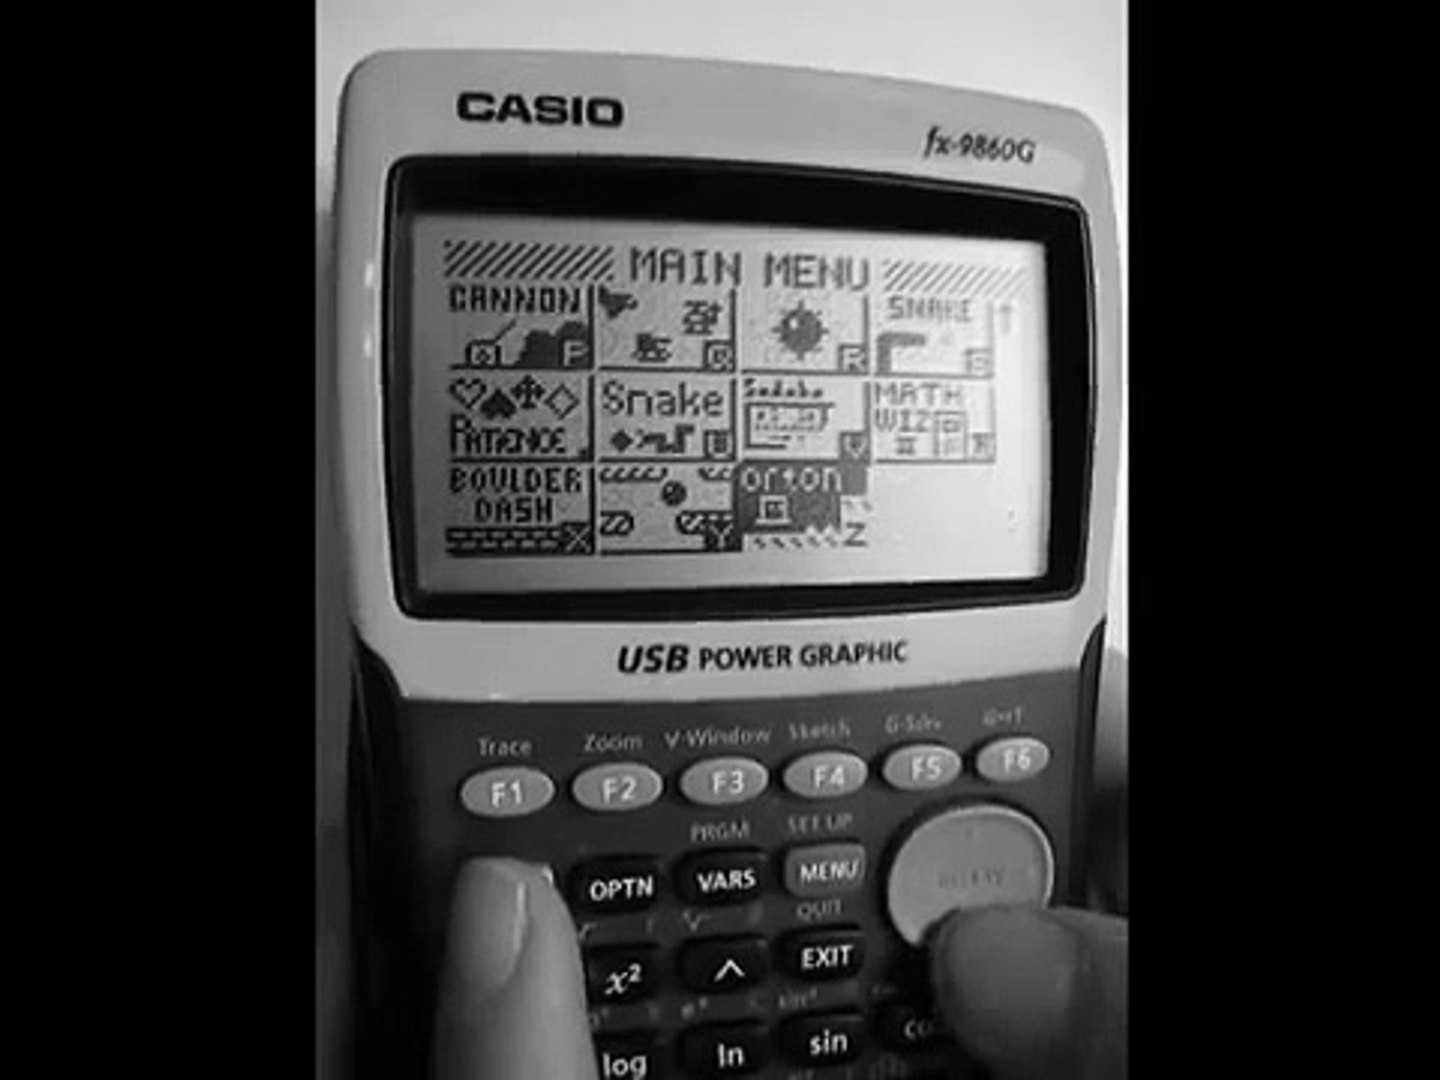 Games on Casio fx 9860G calculator - video Dailymotion